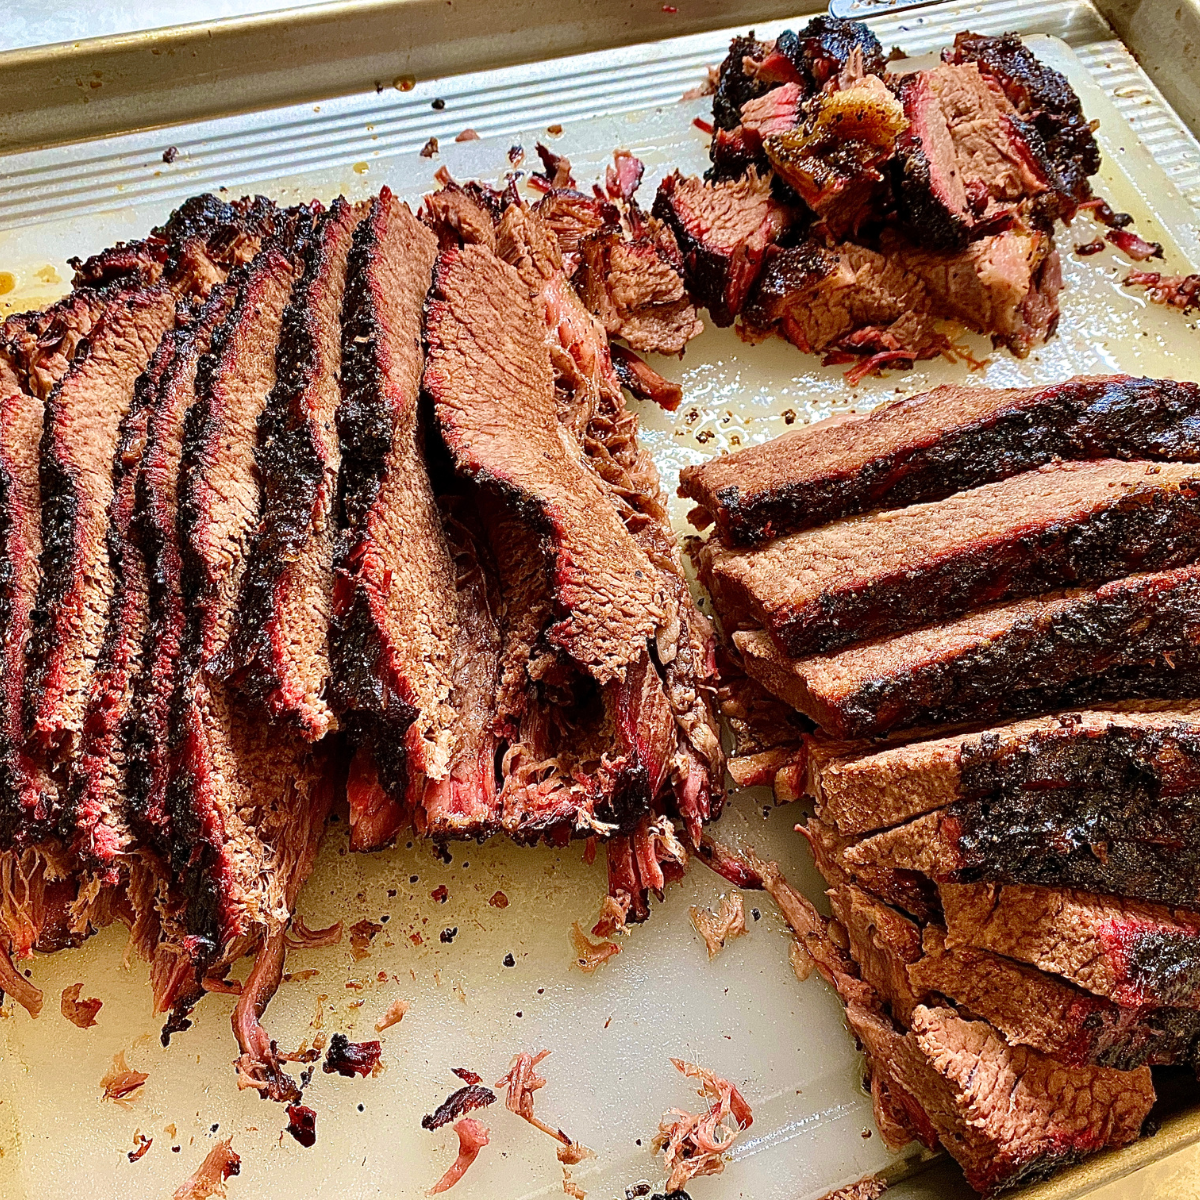 top view of sliced cooked brisket to show what part of cow is brisket